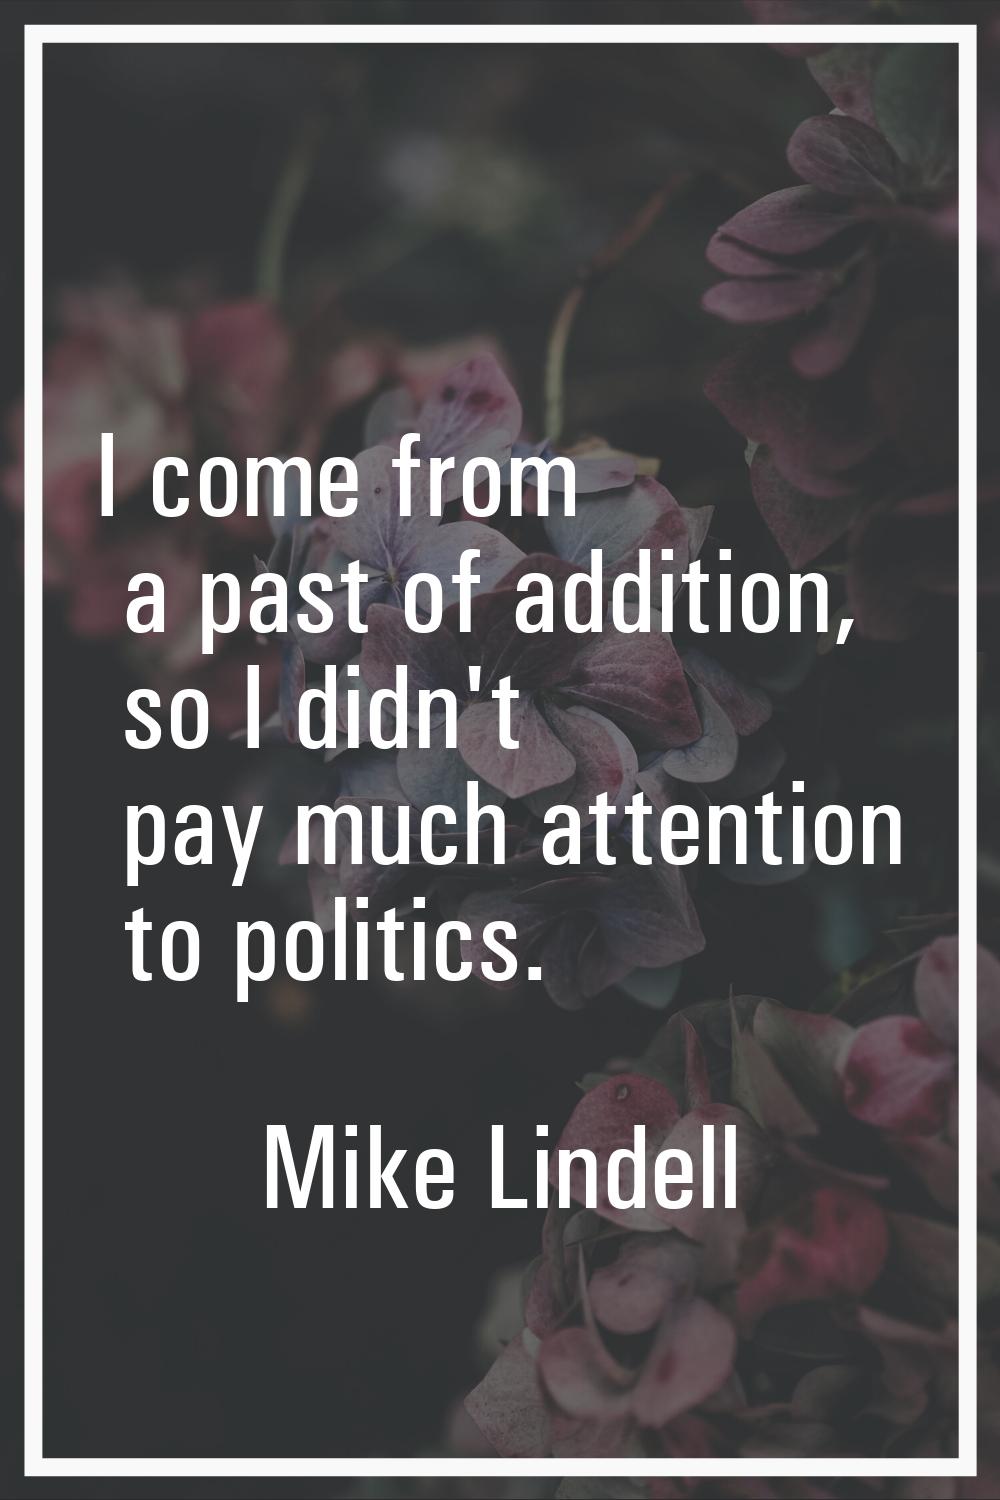 I come from a past of addition, so I didn't pay much attention to politics.